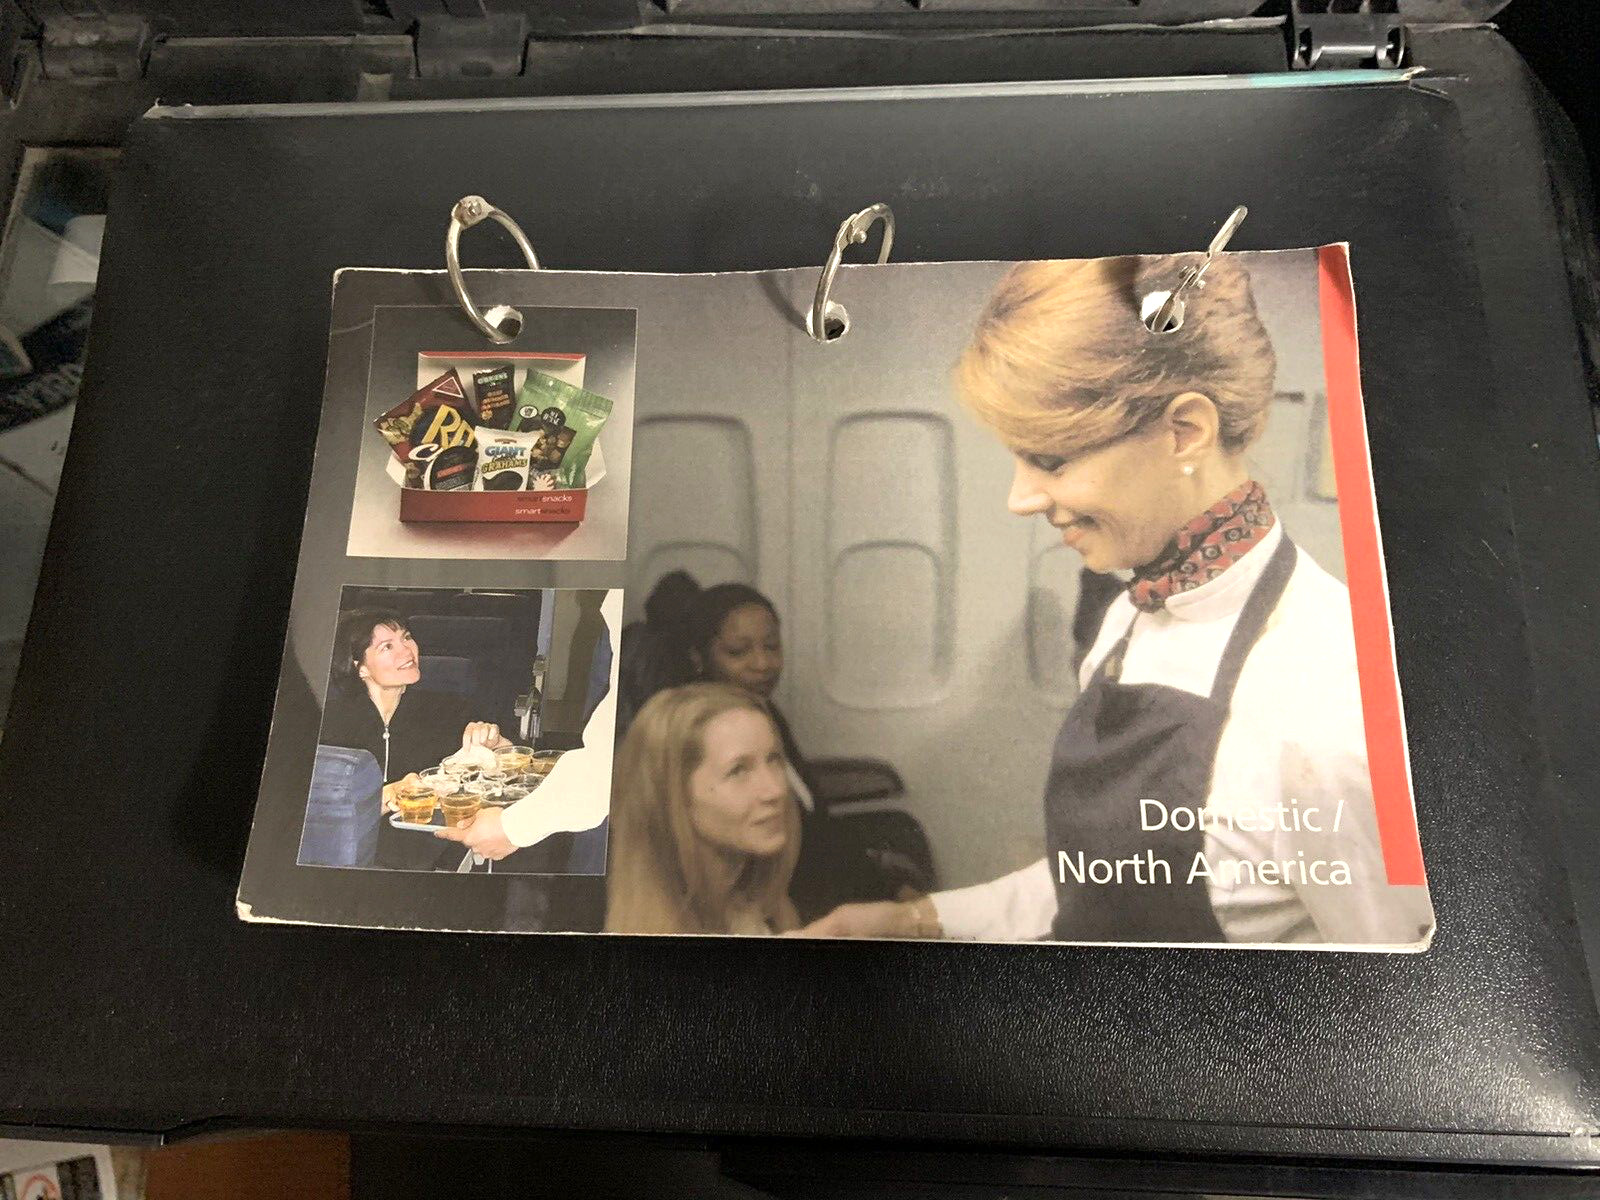 NORTHWEST AIRLINES INFLIGHT SERVICE FOR FLIGHT ATTENDANTS SERVICE GUIDE 2001